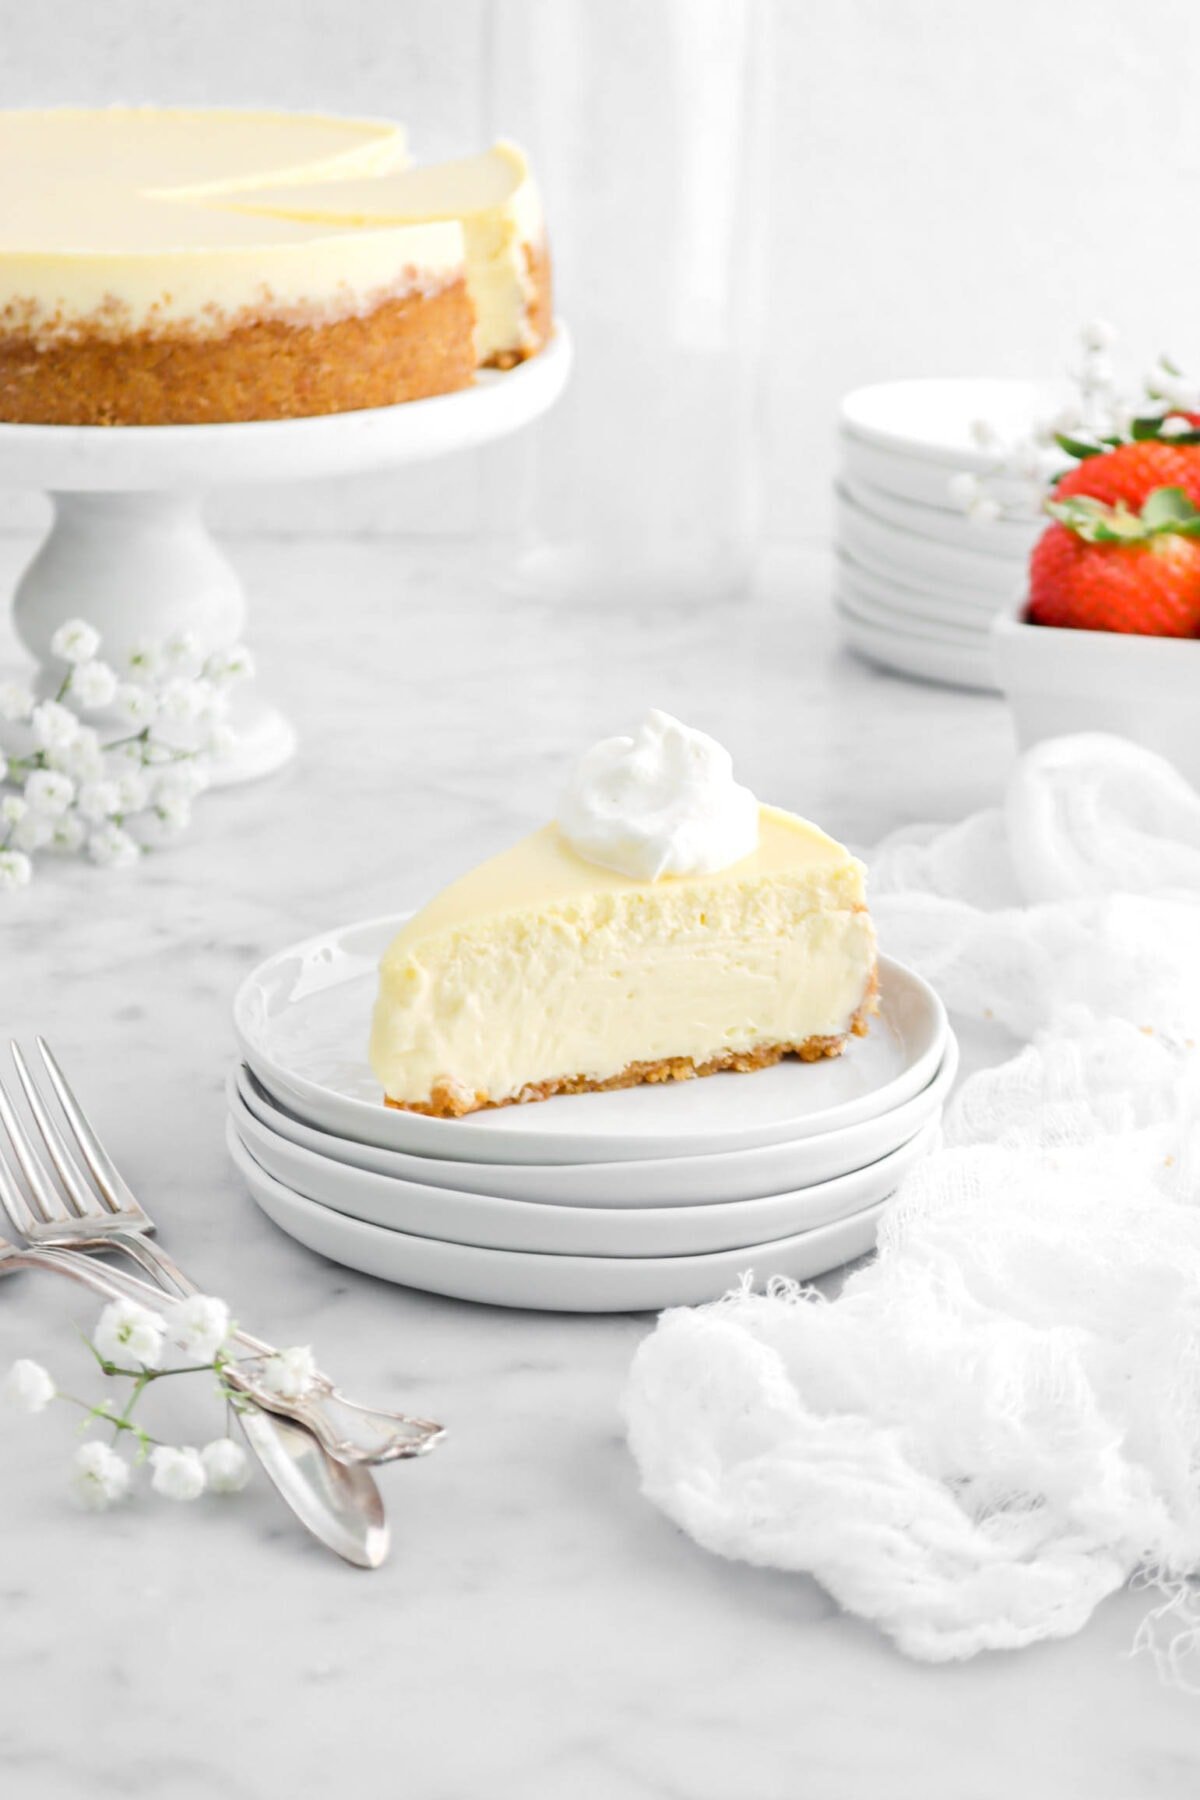 slice of cheesecake on four stacked plates with dollop of whipped cream on top, forks and white napkin beside, cheesecake on cake stand and strawberries behind